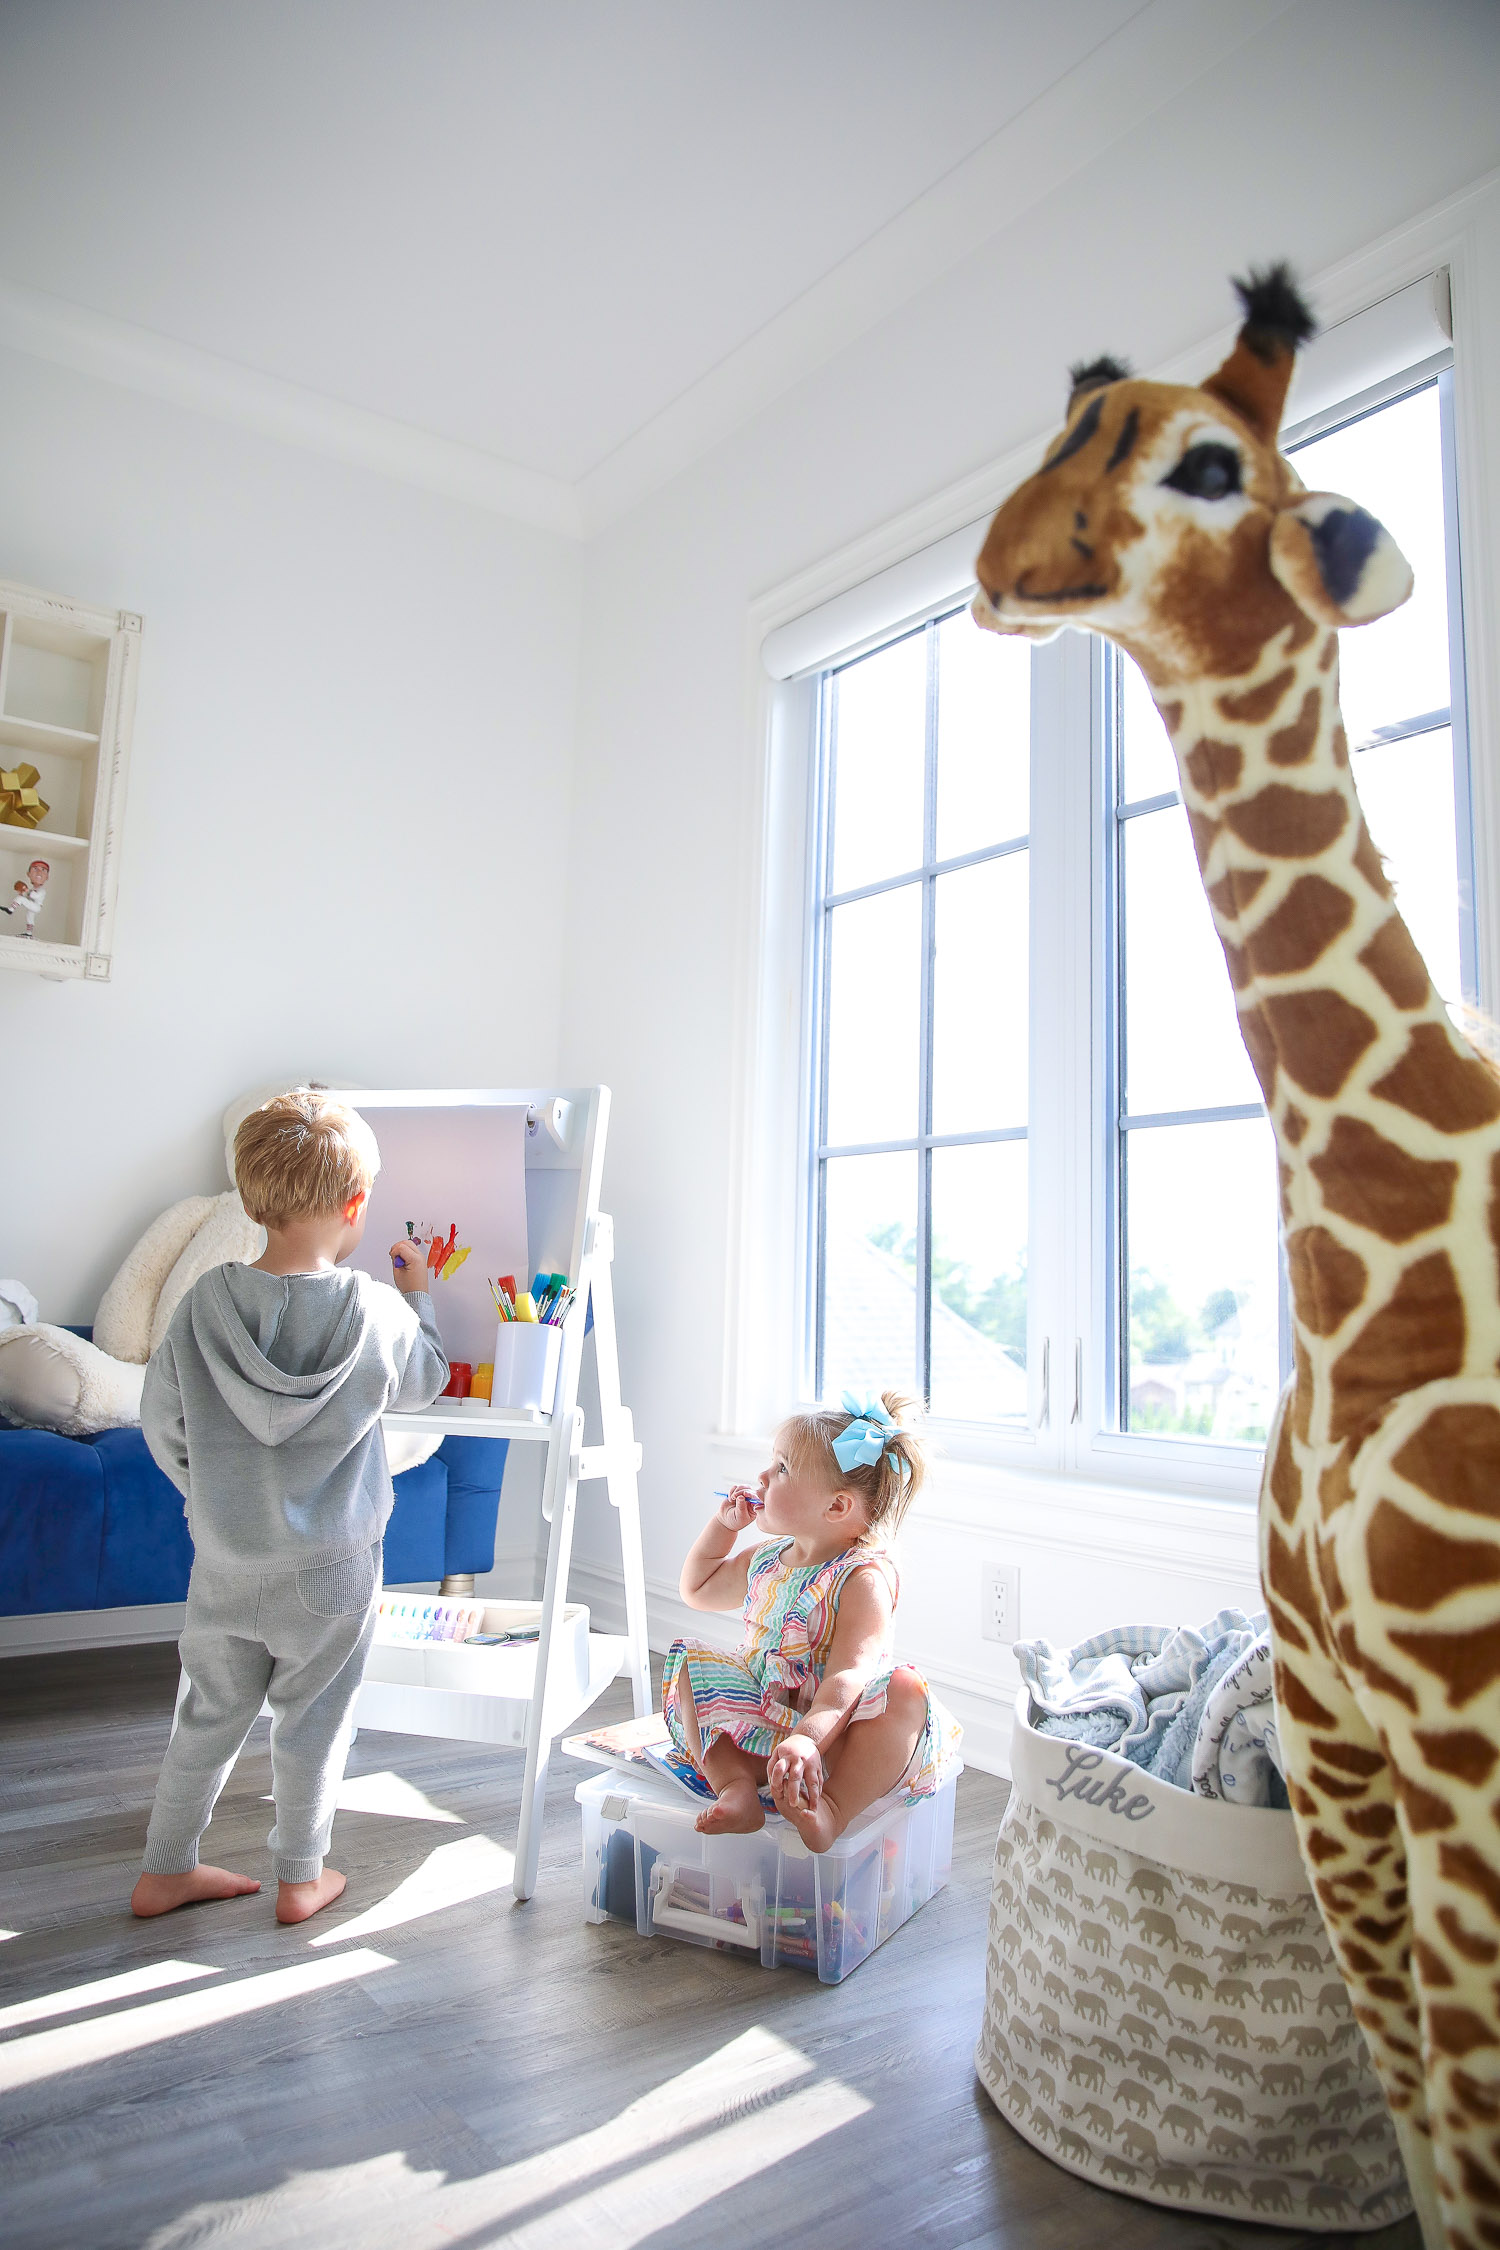 walmart kids home organization must haves, playroom organization ideas, emily gemma, the sweetest thing blog |Instagram Recap by popular US lifestyle blog, The Sweetest Thing: image of a young boy and girl in a play room with a Delta Children whiteboard, Humble Crew storage, Melissa and Doug giraffe, and ArtBin art container. 